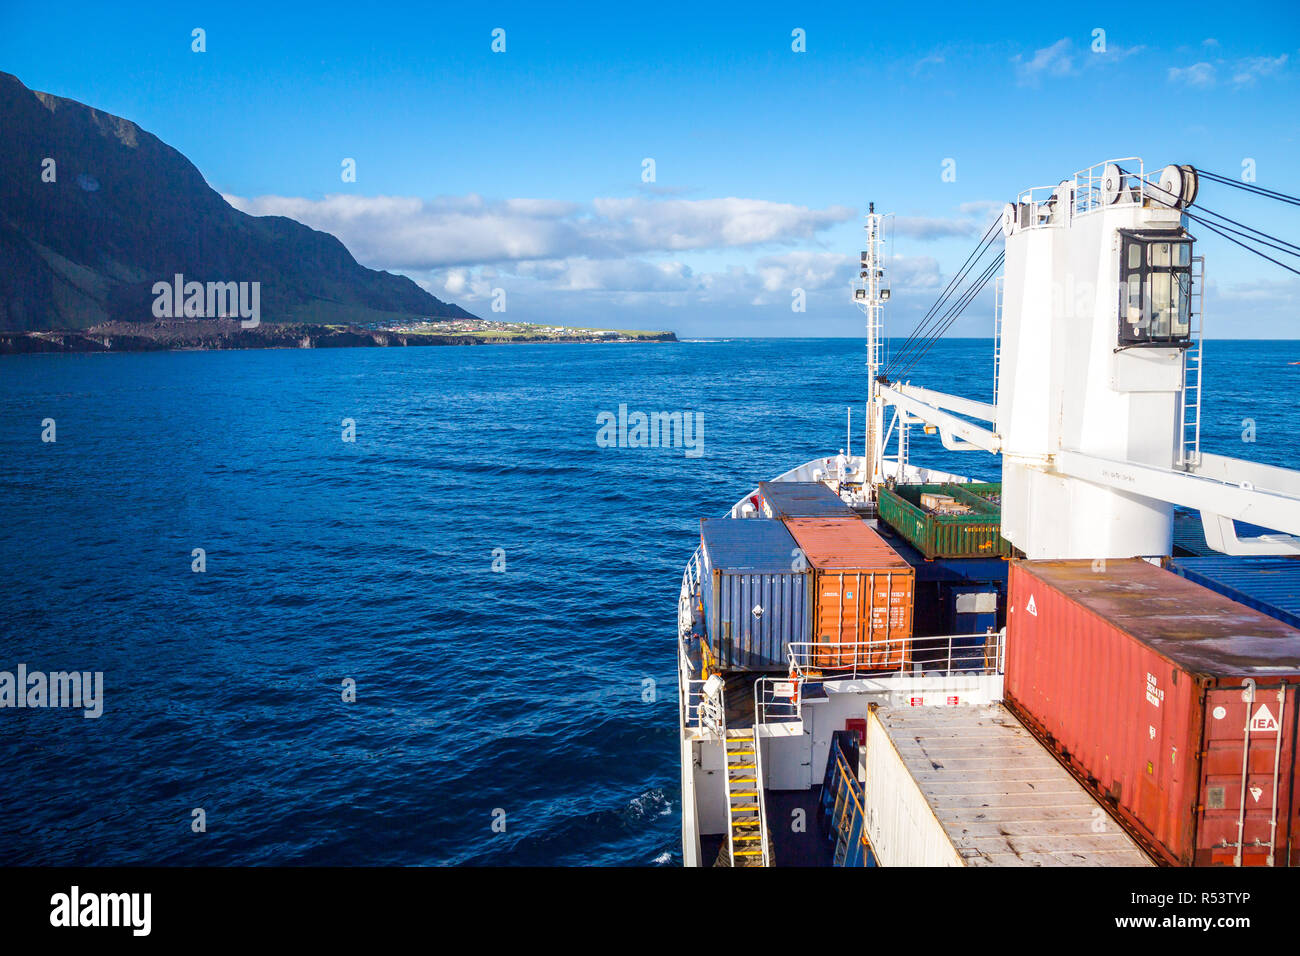 A cargo ship is arriving to Edinburgh of the Seven Seas, the main and only town (settlement) of Tristan da Cunha island, British overseas territory. Stock Photo